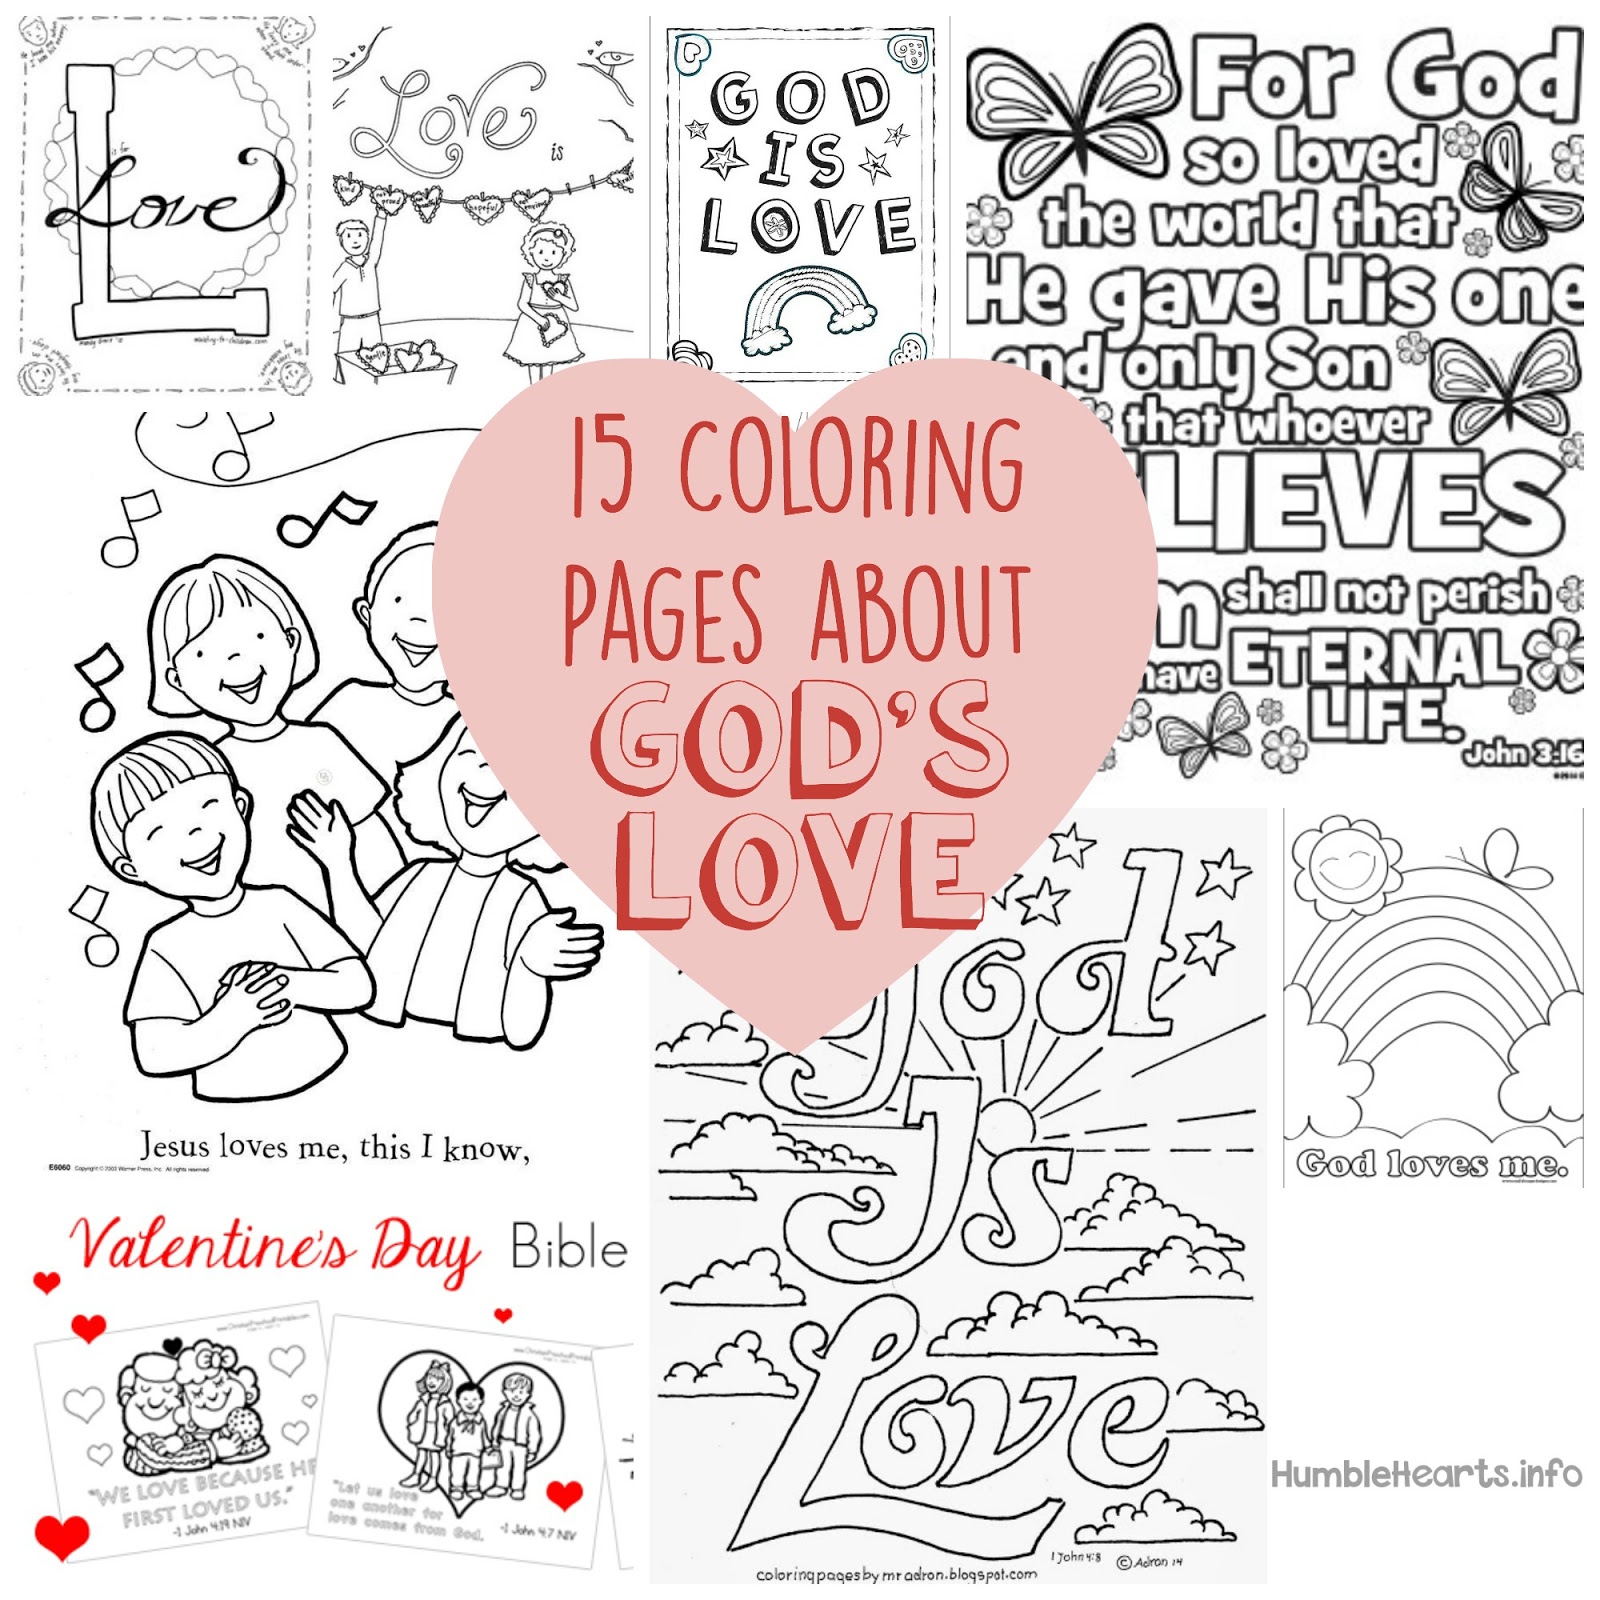 15 Coloring Pages About God s Love Short and Sweet